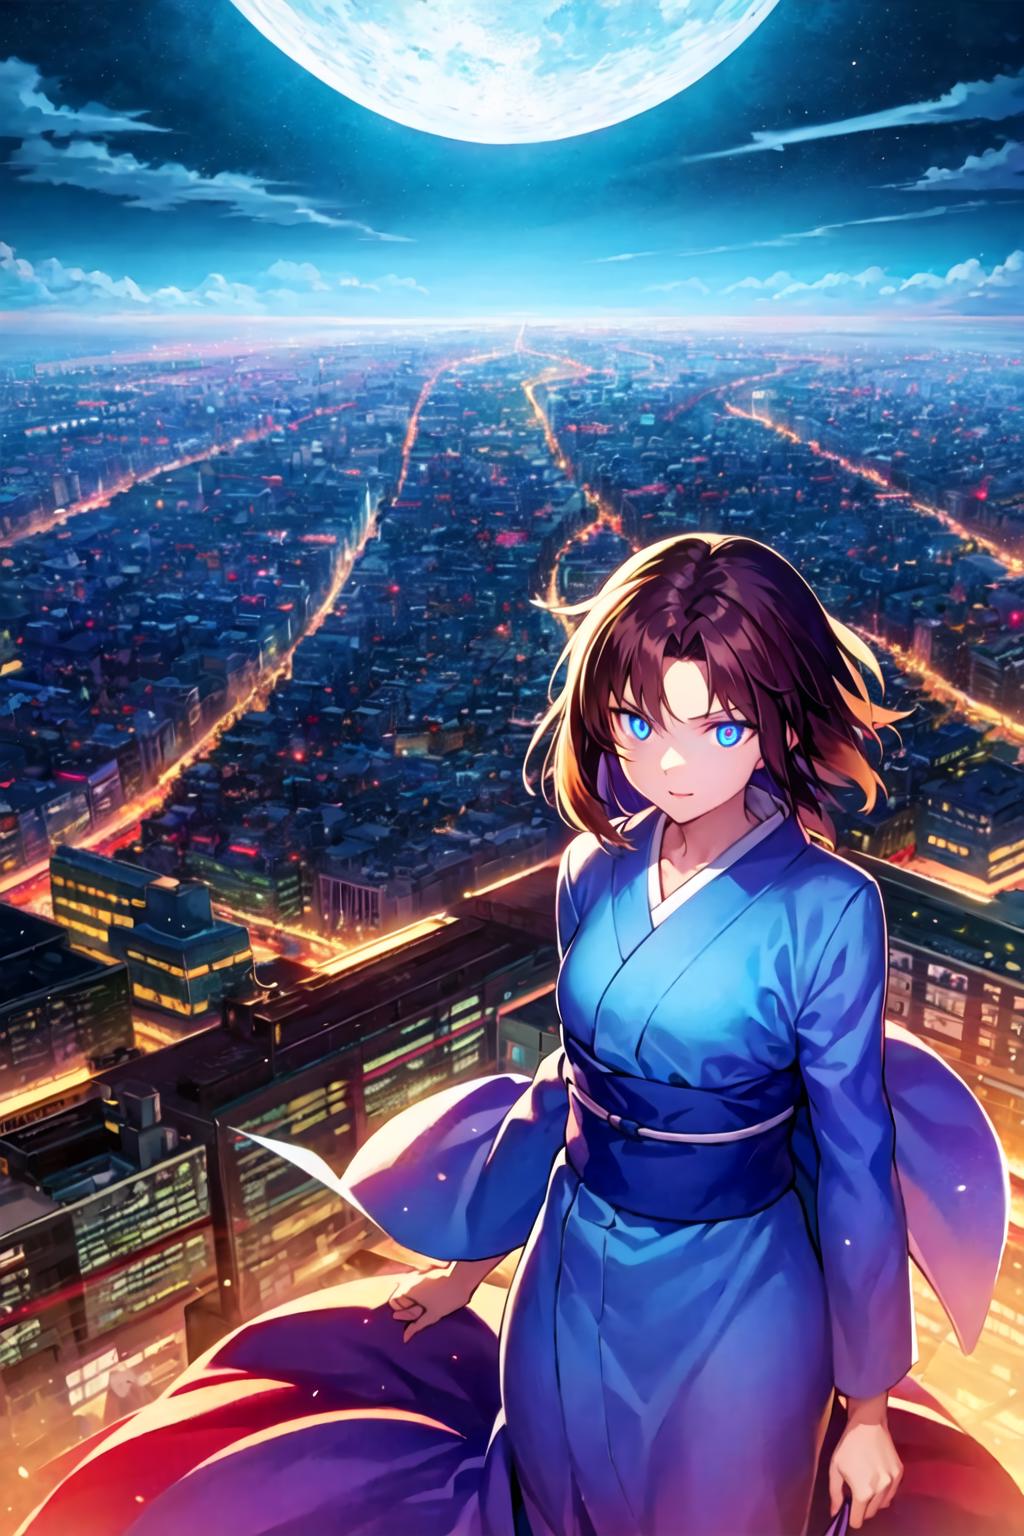 Anime-style illustration of a woman in a blue and white kimono standing in front of a large cityscape at night.